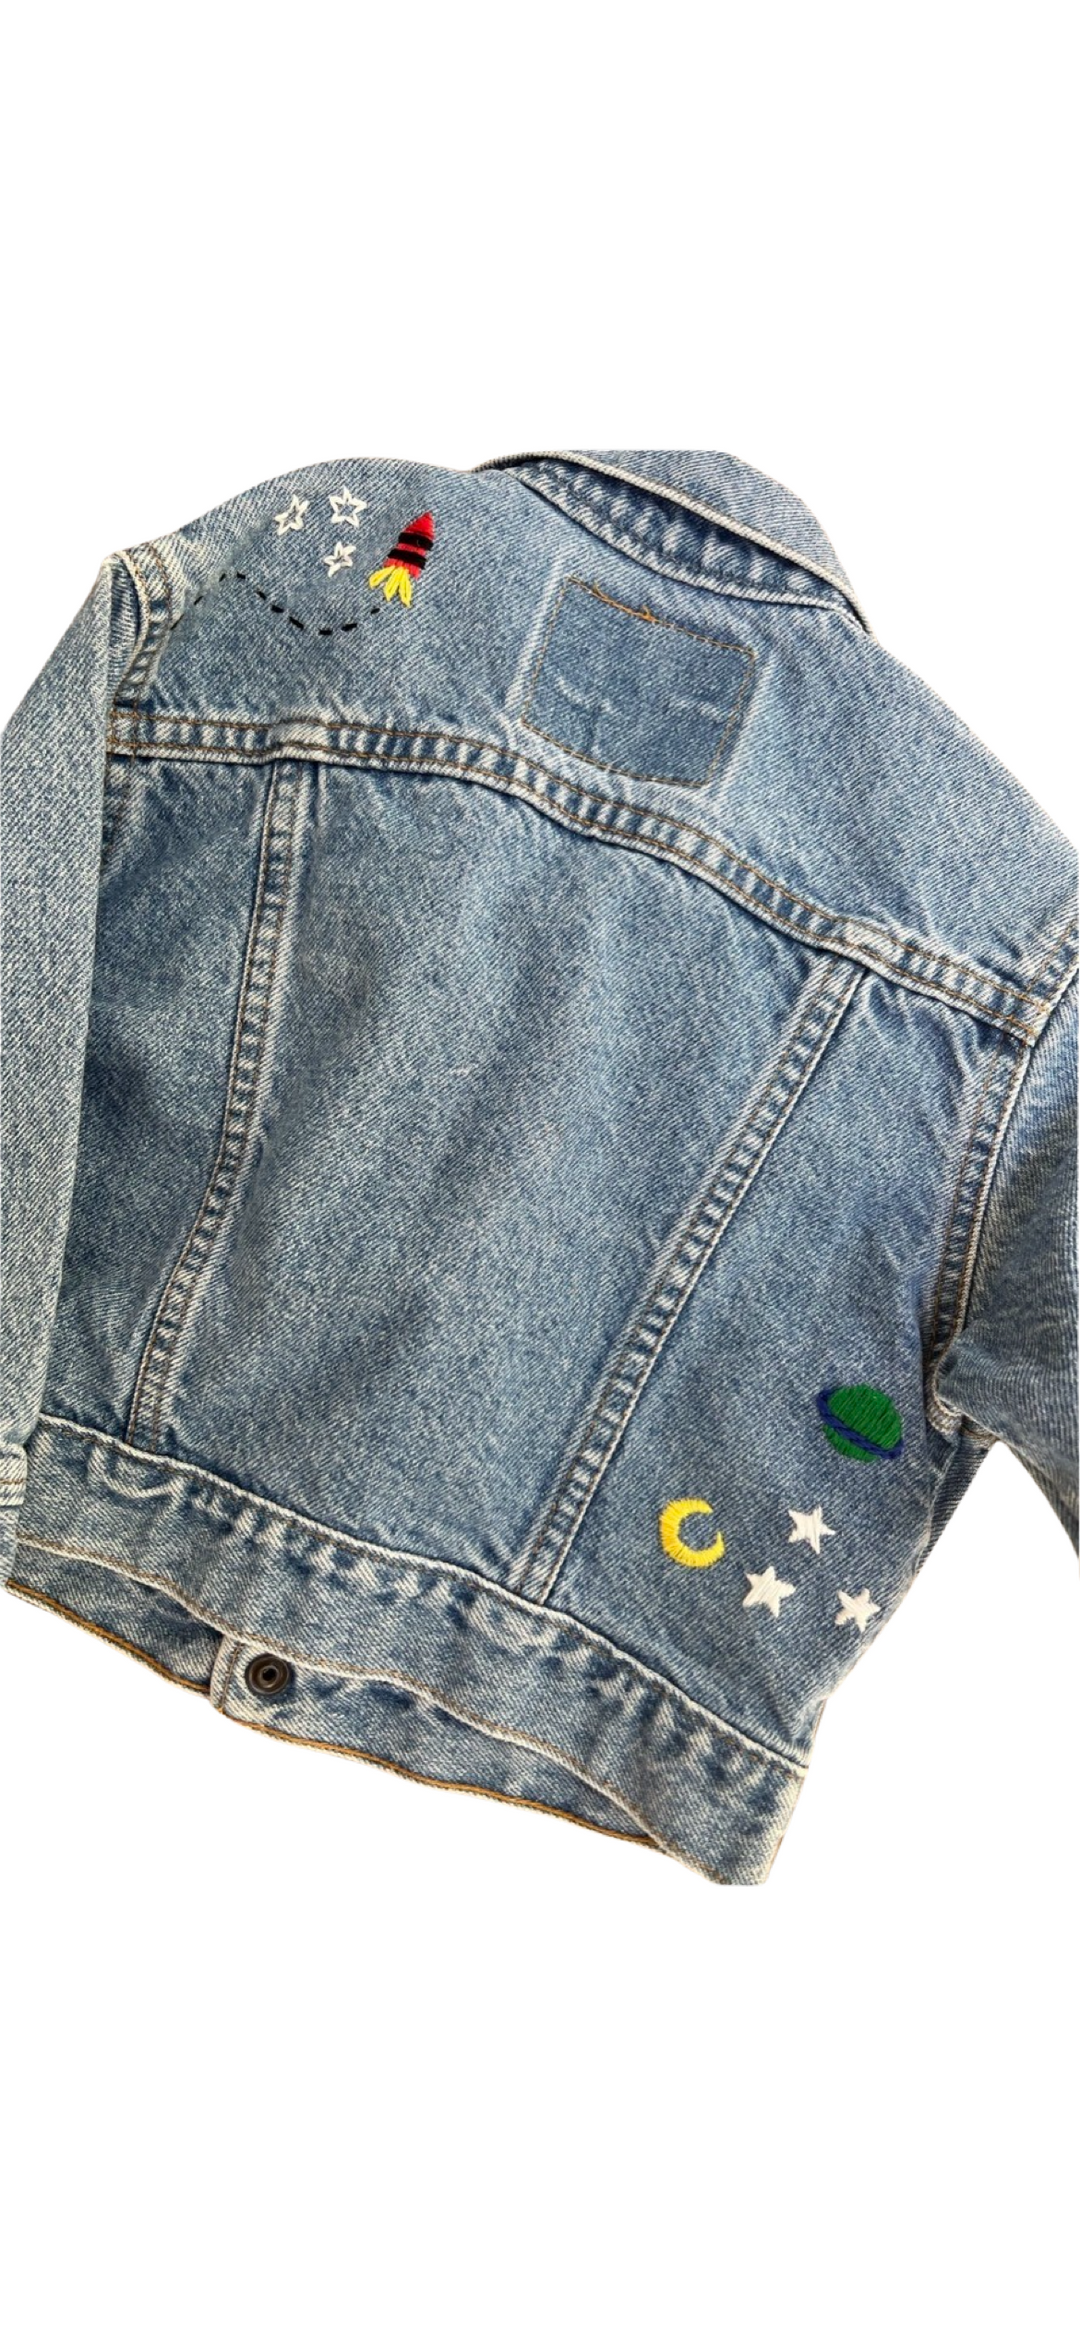 Levi's Space Embroidery Jacket